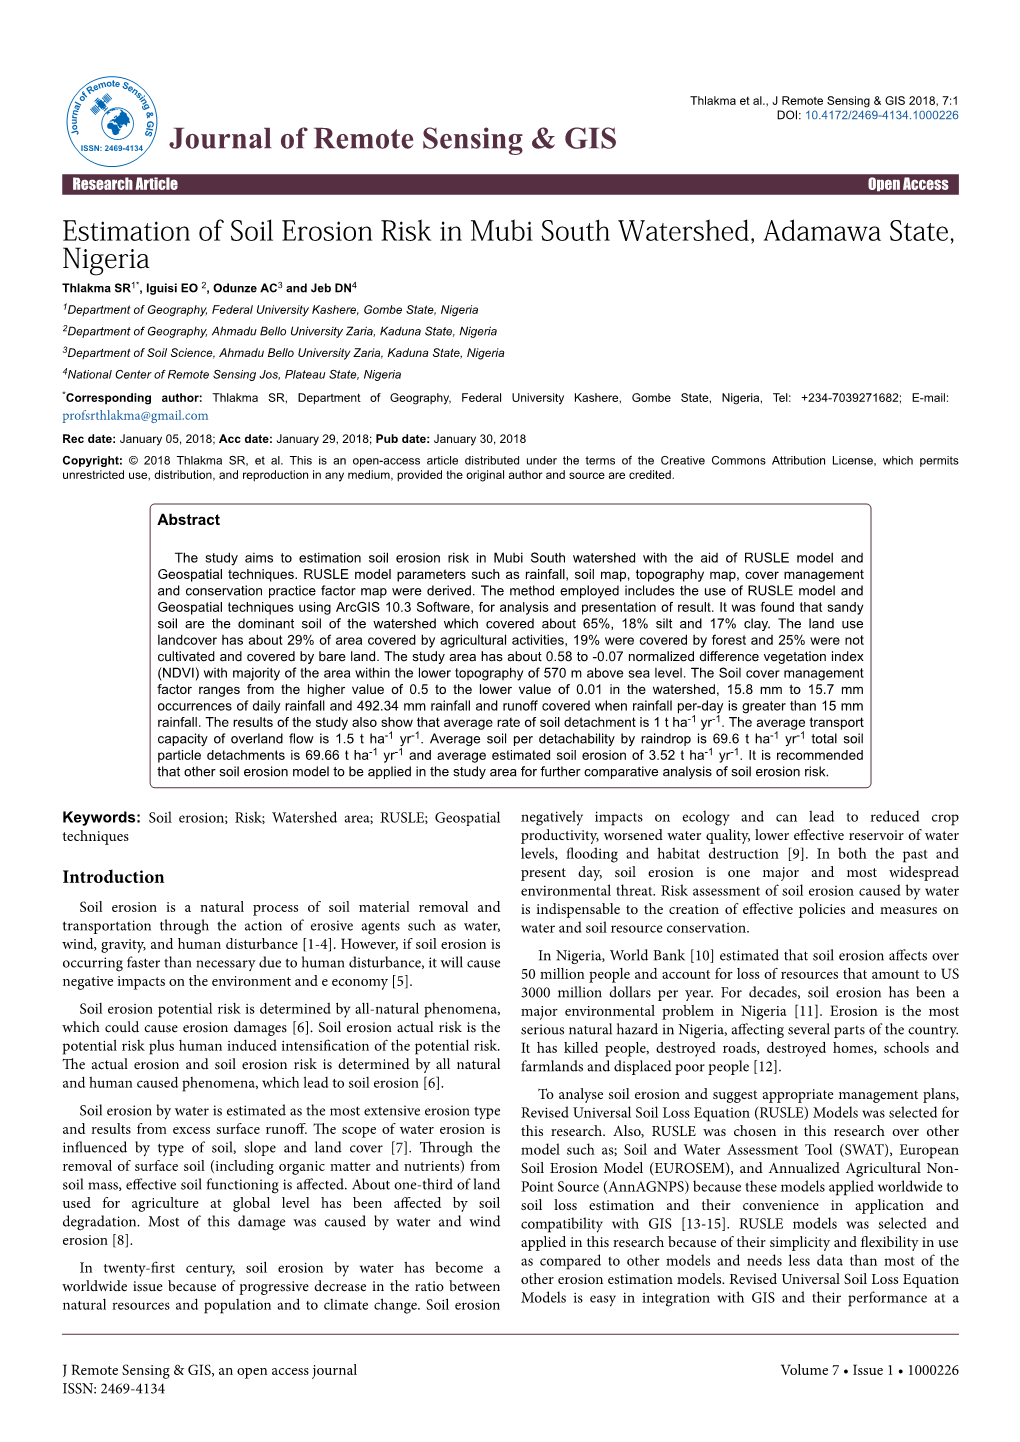 Estimation of Soil Erosion Risk in Mubi South Watershed, Adamawa State